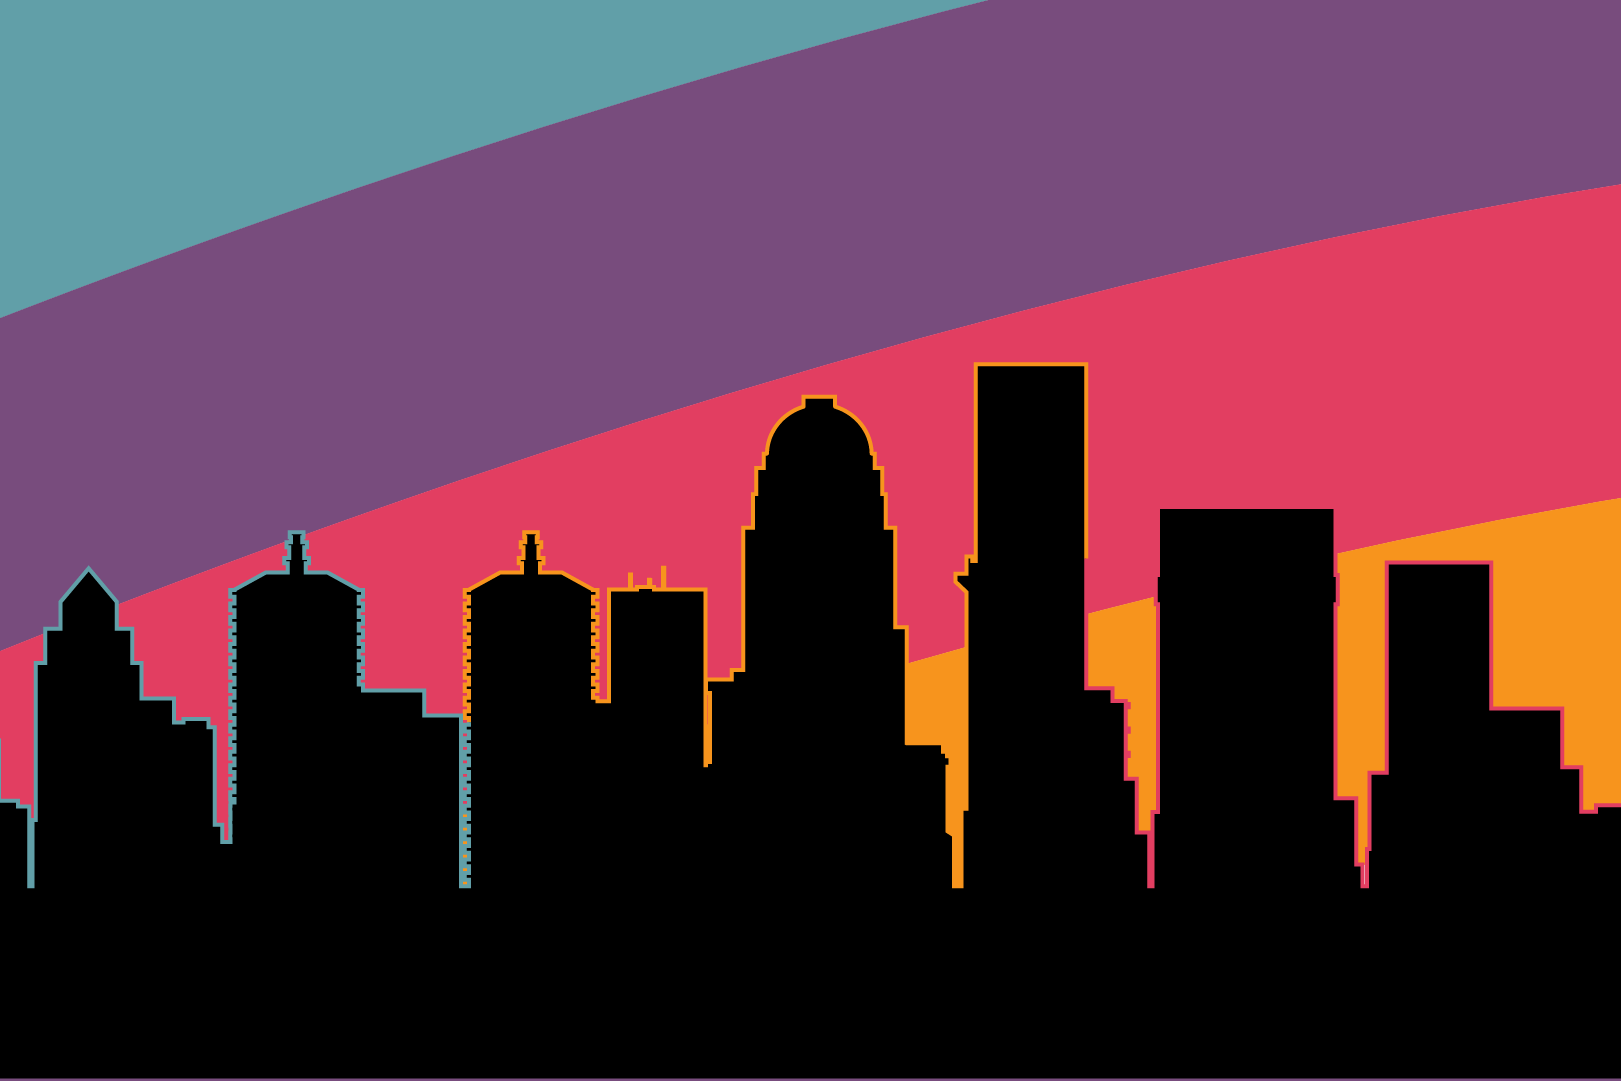 Silhouette of the Louisville skyline in front of a sky filled by a rainbow made up of the APH brand colors teal, purple, pomegranate, and gold.